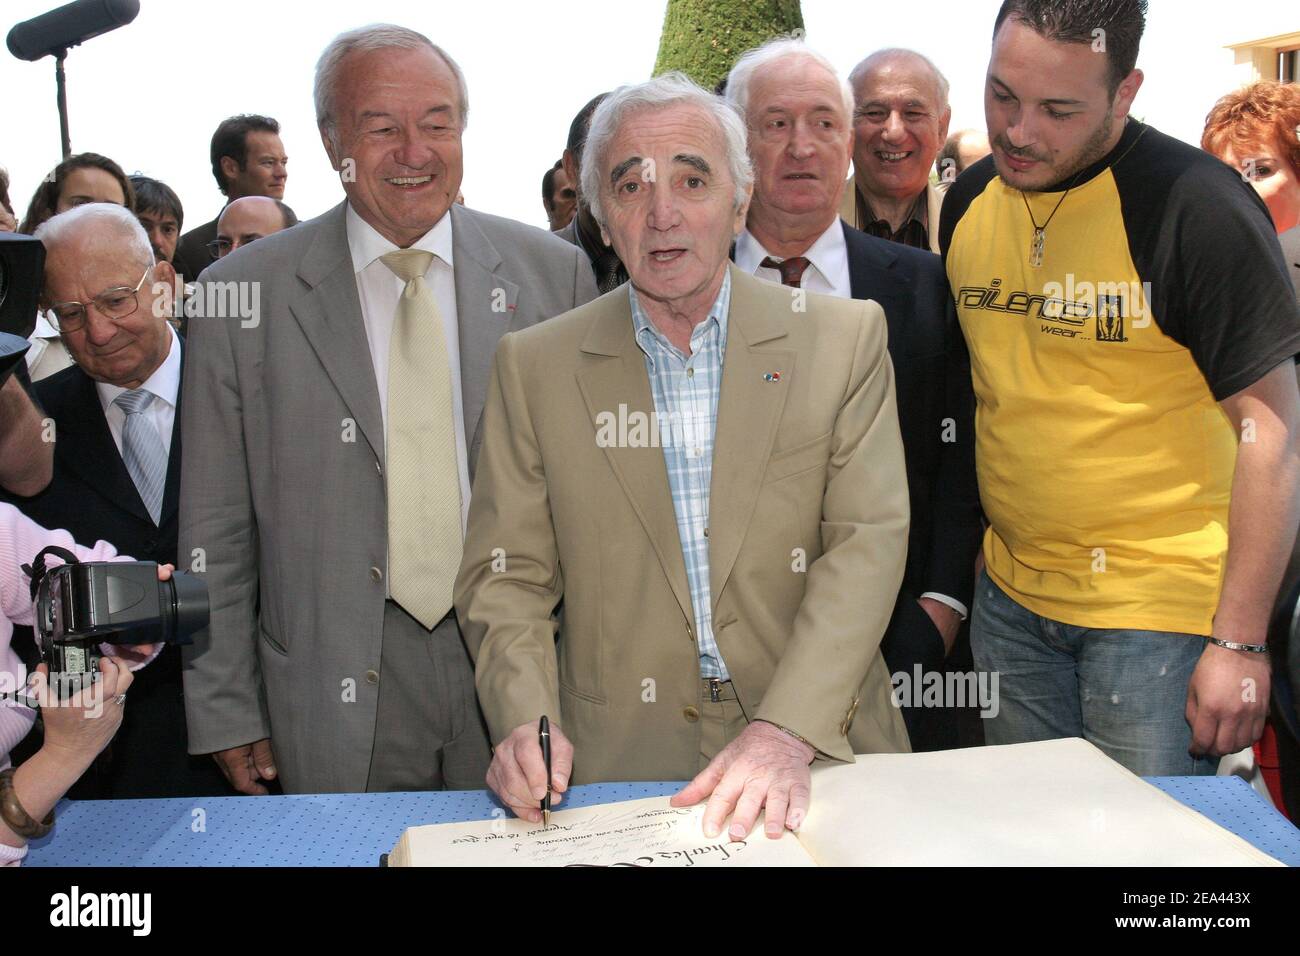 French singer Charles Aznavour (C) receives from Cannes' mayor Bernard Brochand (L), the medal of Citizen of Honor and the palm of the city during a ceremony held at the Villa Domergue in Cannes, France on May 18, 2005. Photo by Benoit Pinguet/ABACA Stock Photo